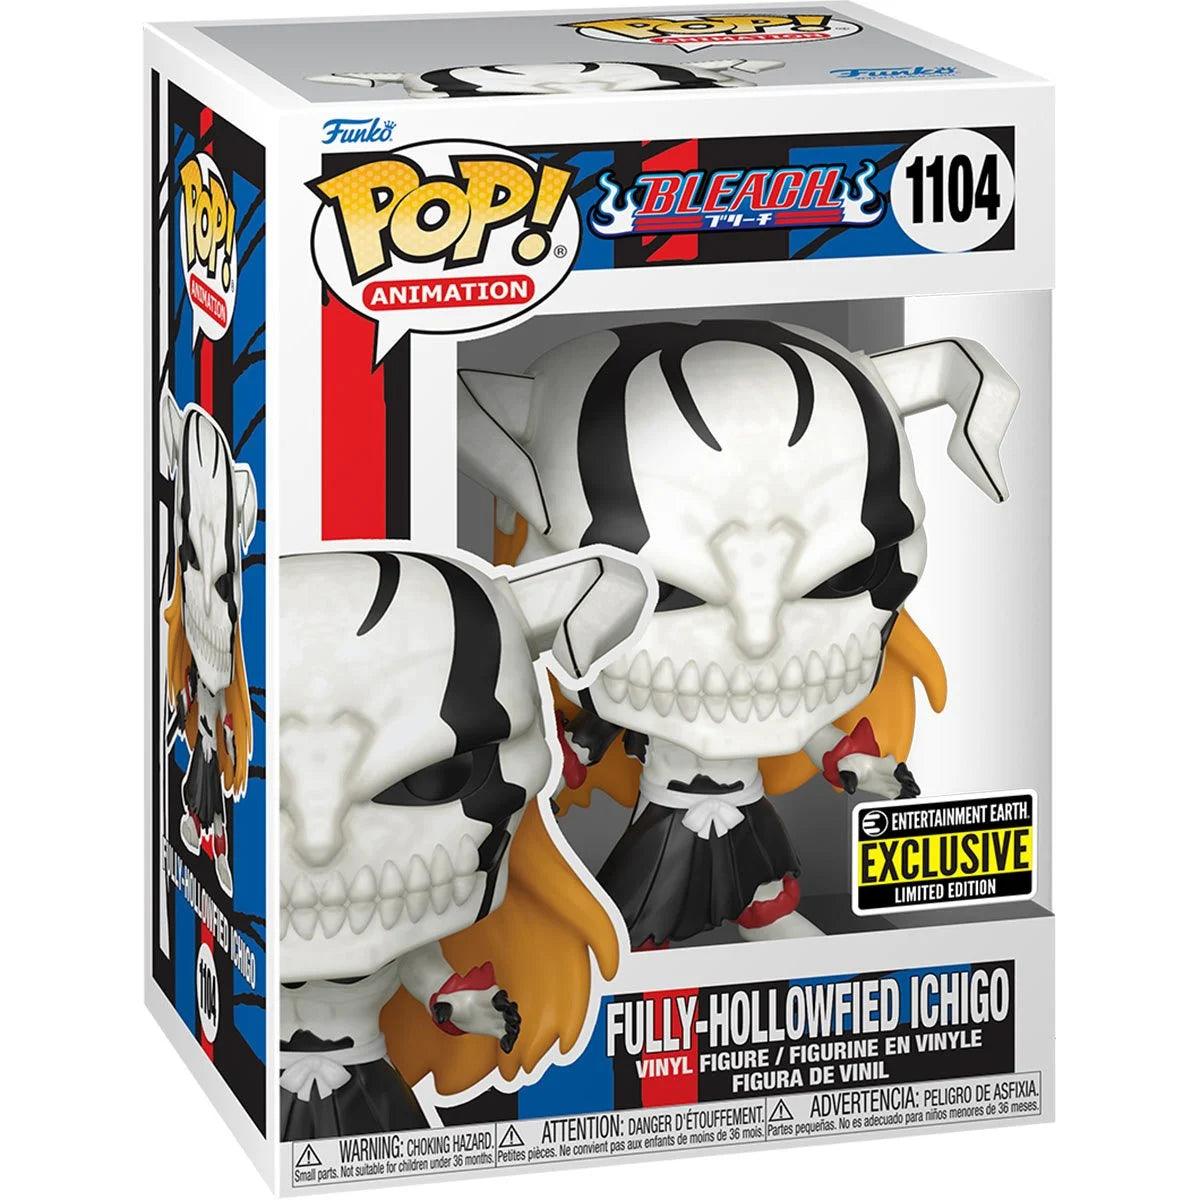 Pop! Animation - Bleach - Fully-Hollowfied Ichigo - #1104 - Entertainment Earth EXCLUSIVE LIMITED Edition - Hobby Champion Inc